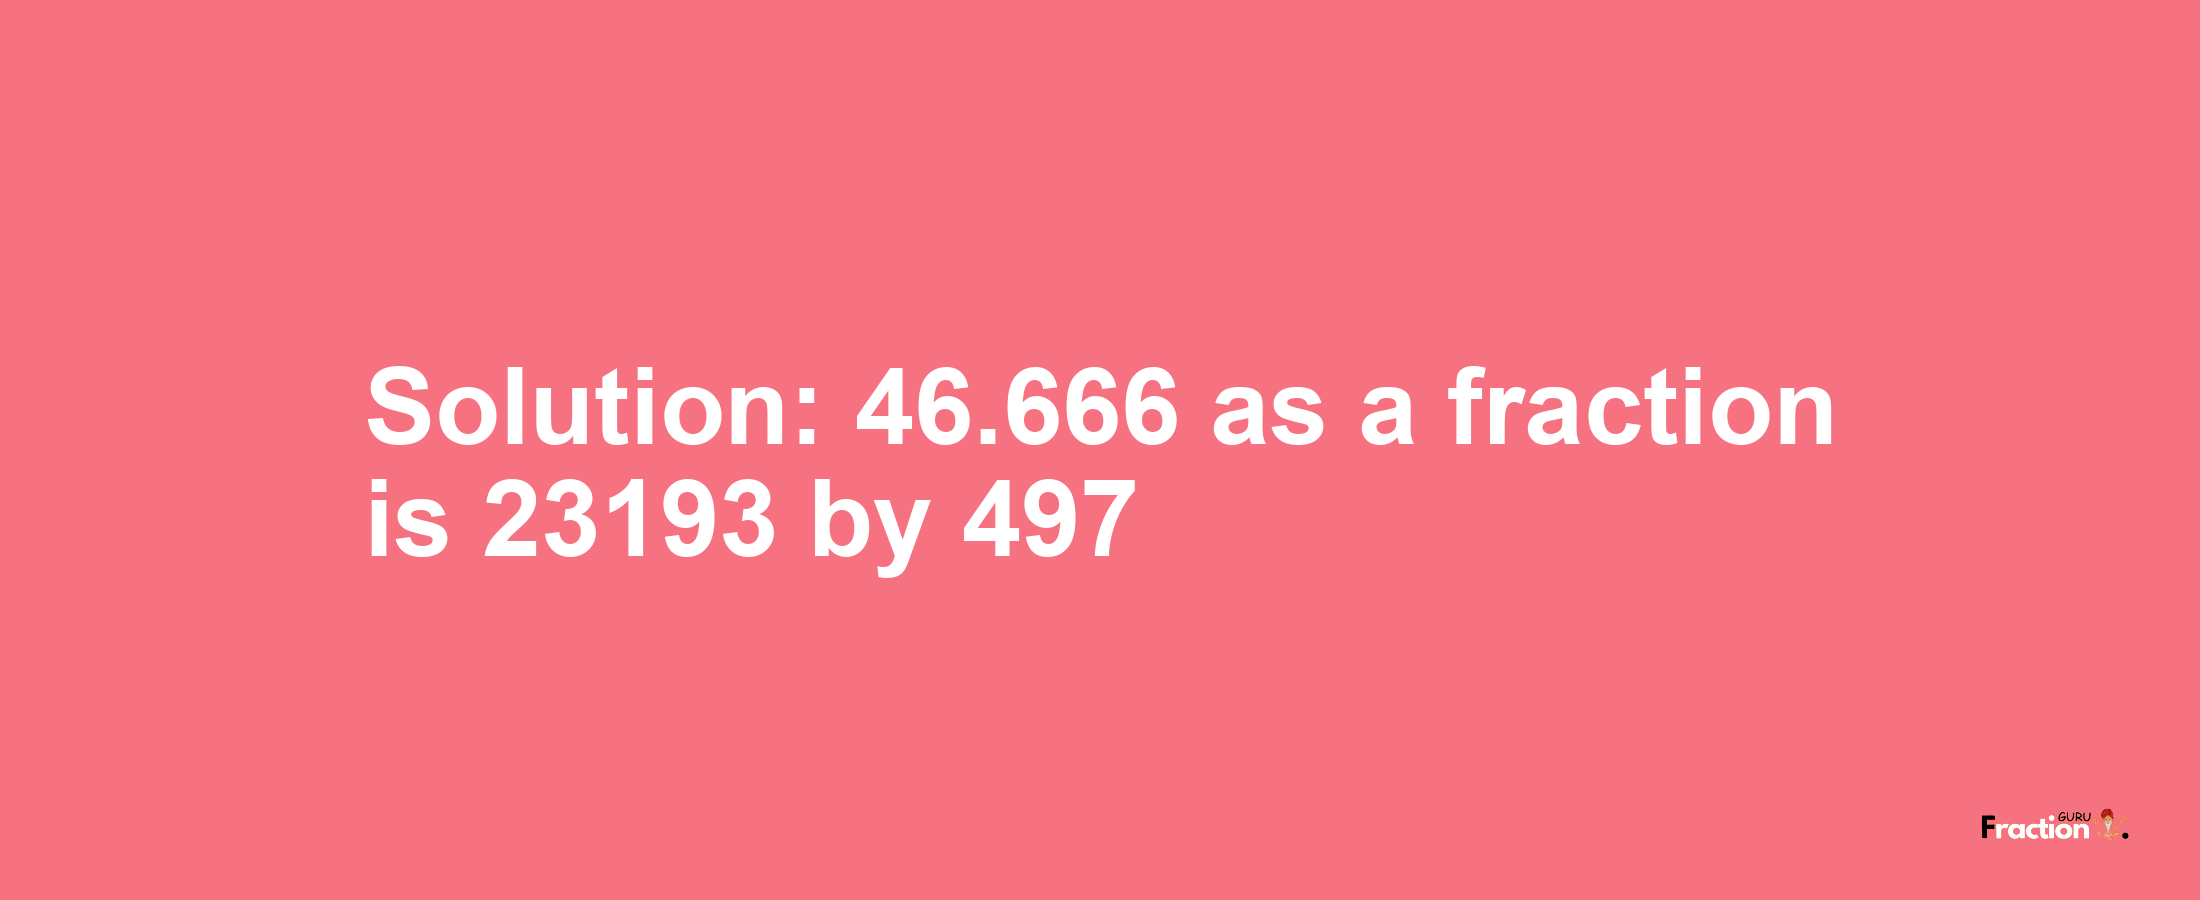 Solution:46.666 as a fraction is 23193/497